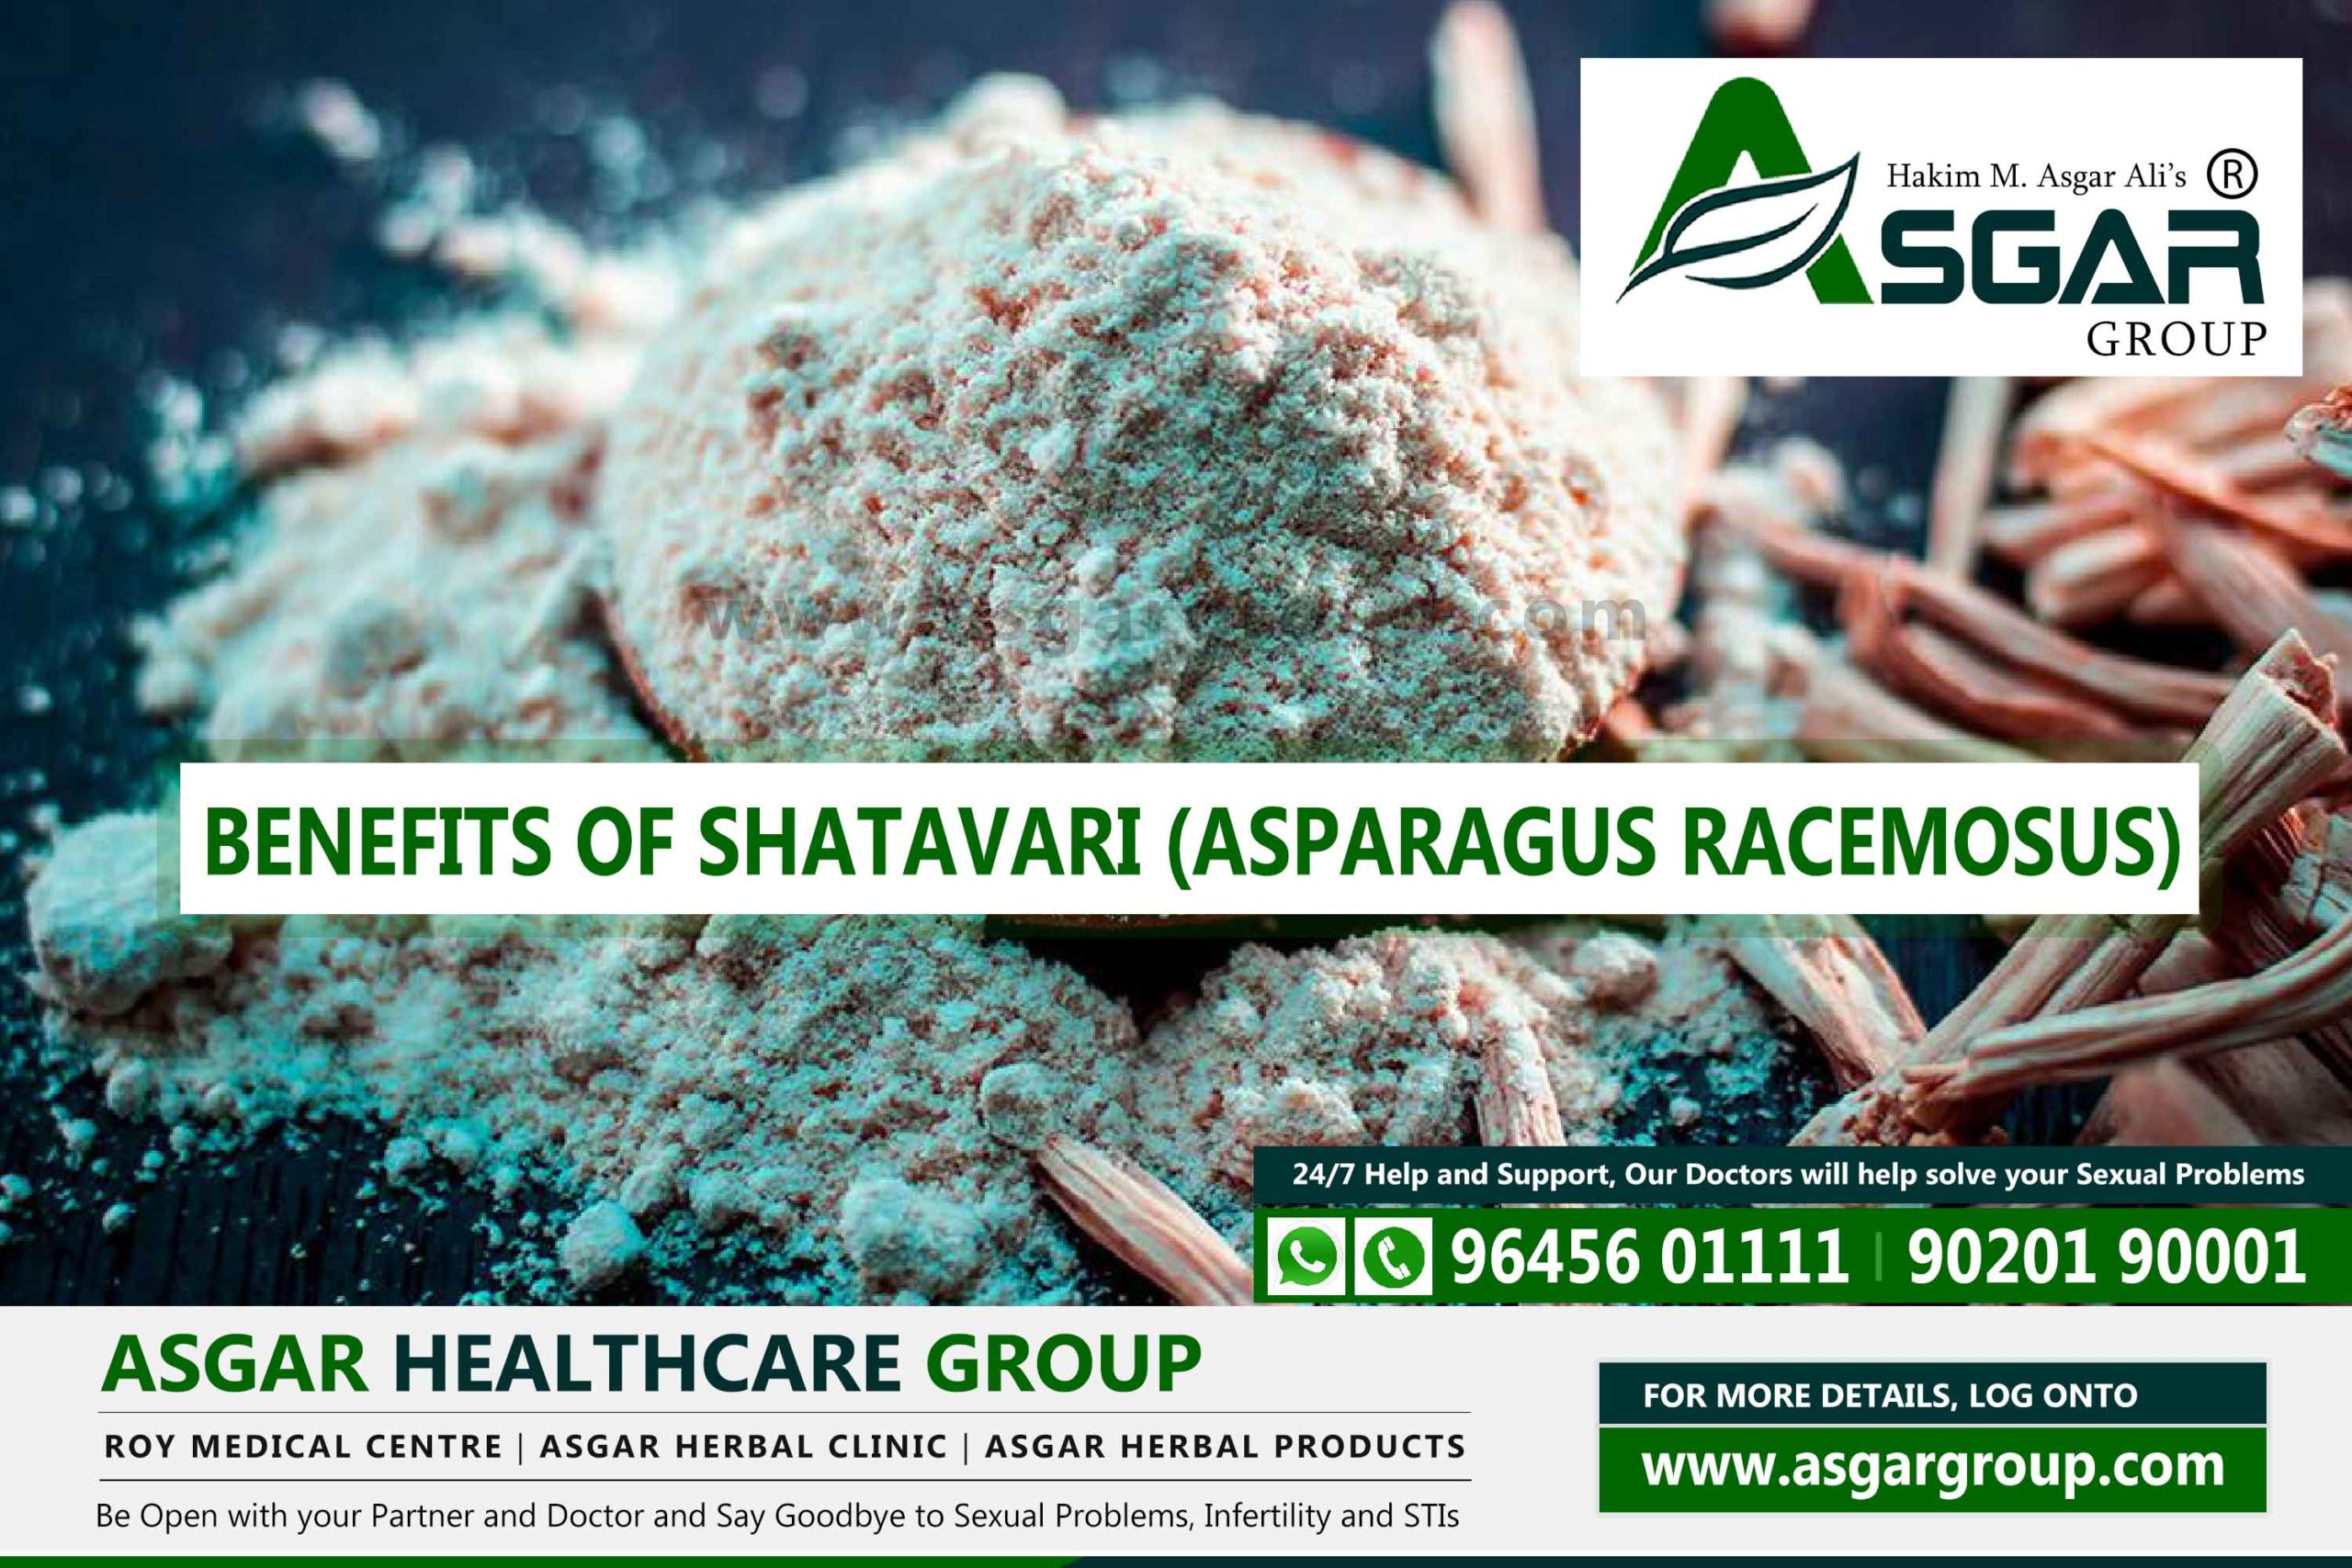 Benefits of Shatavari Asparagus Racemosus sexual problems reproductive system asgar herbal healthcare products scaled